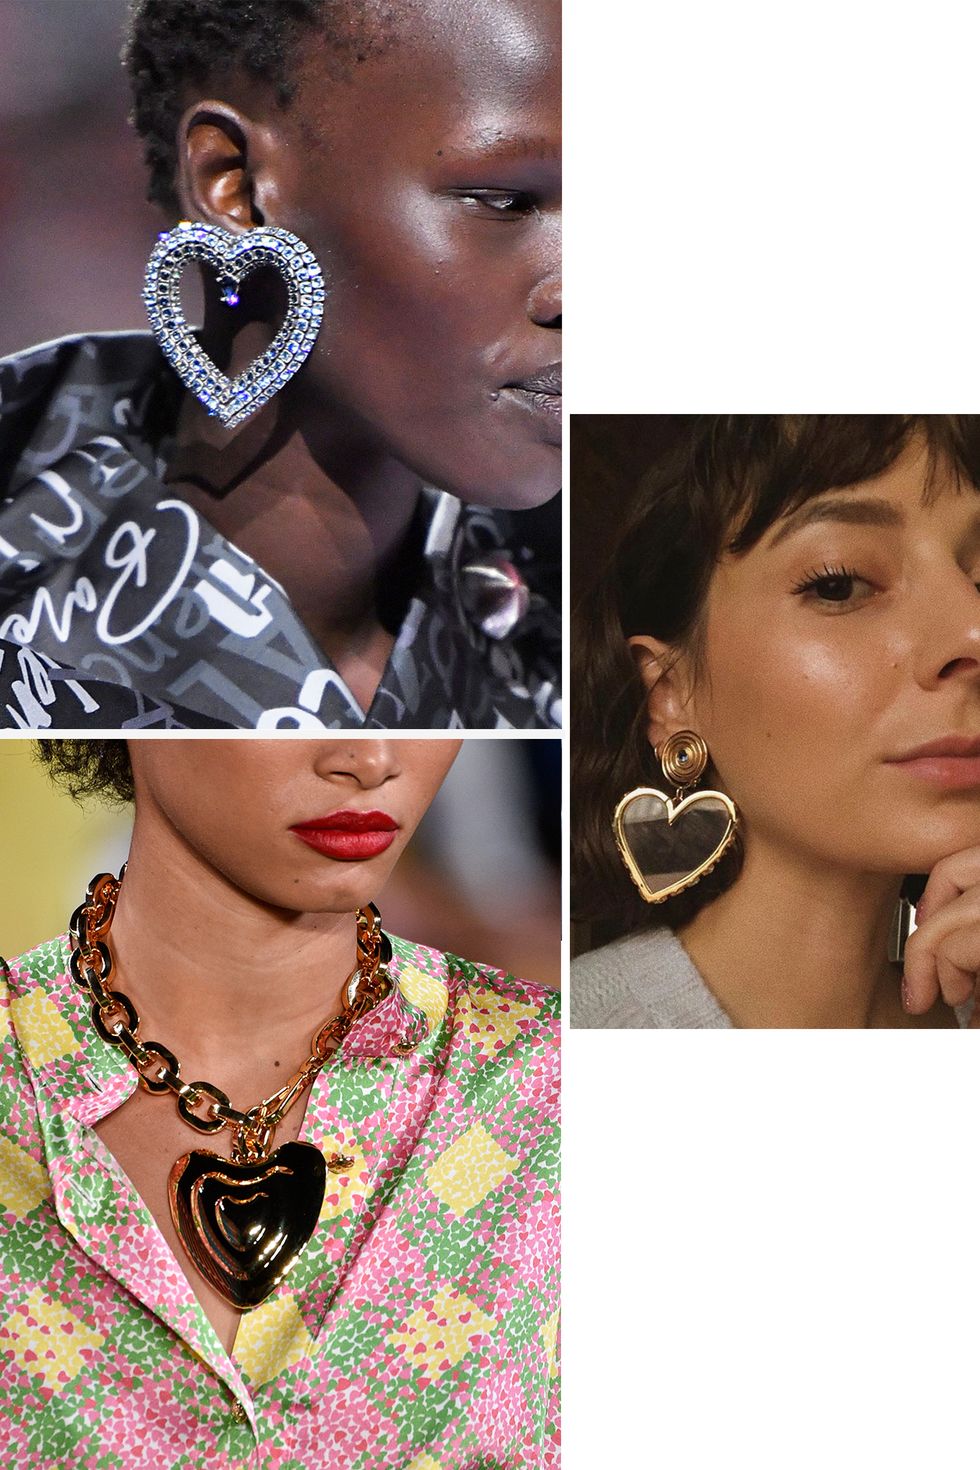 Jewelry trends: The top 10 pieces of body jewelry to wear for summer 2019